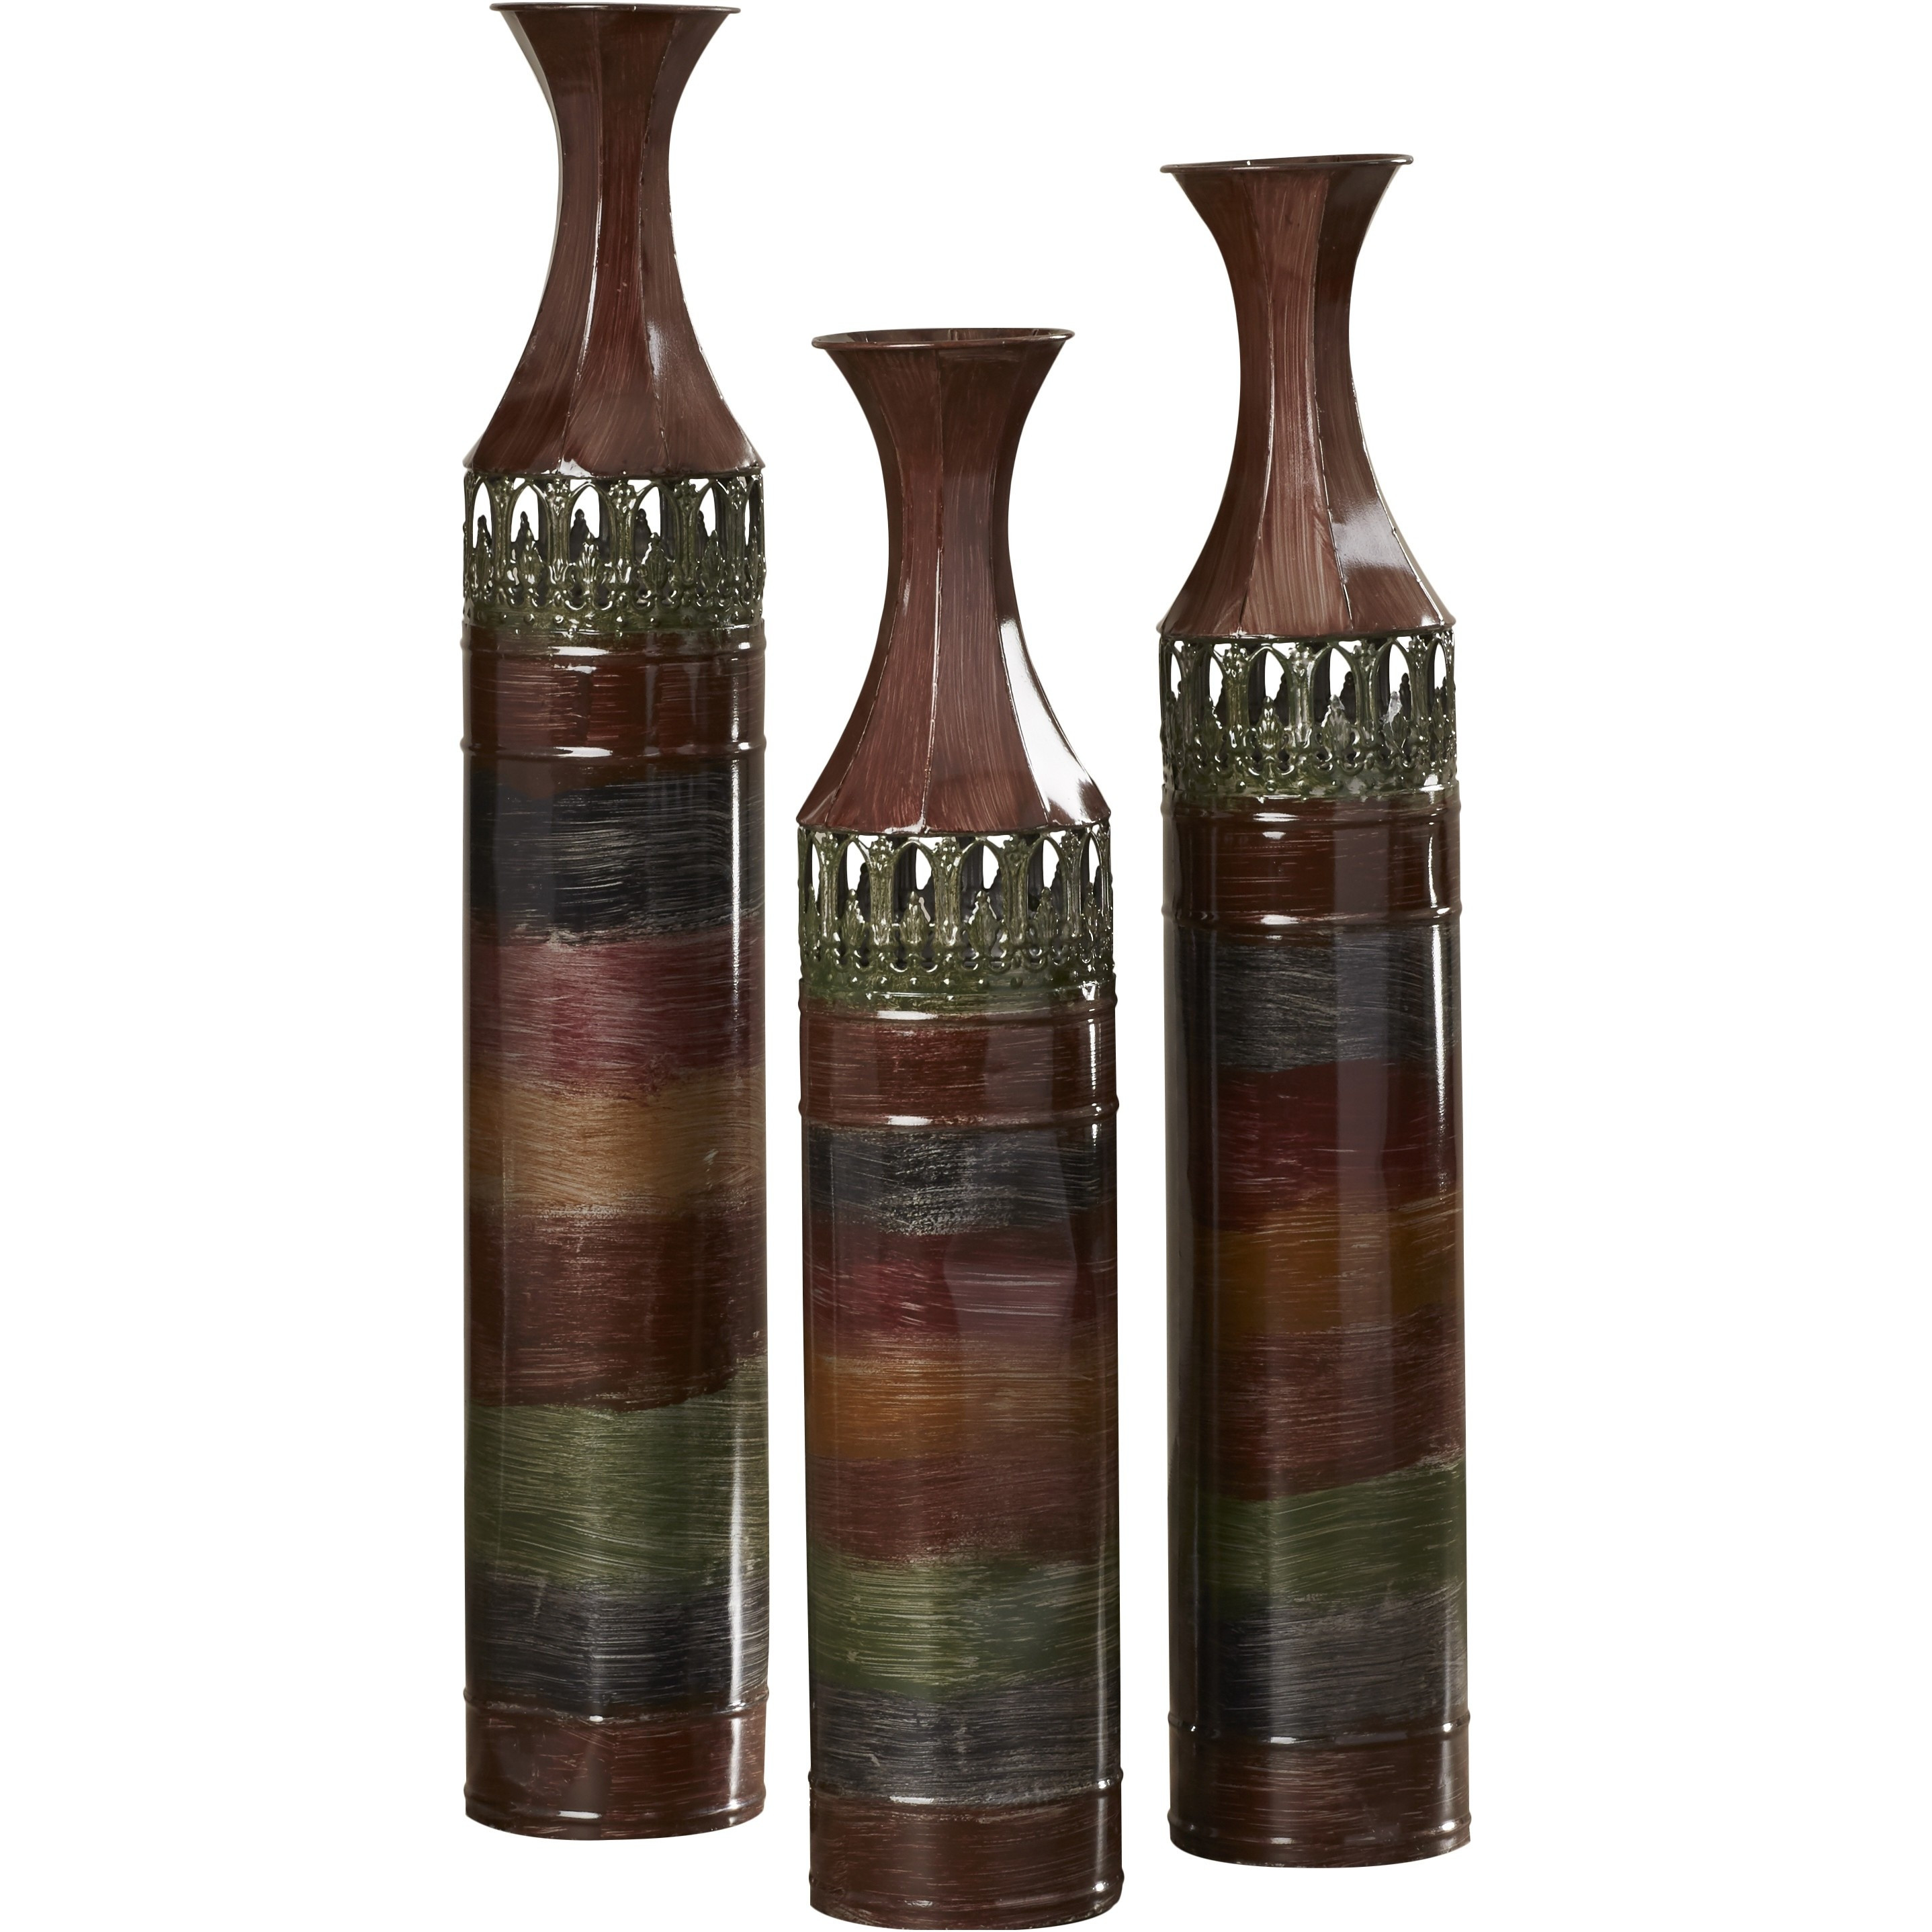 30 Recommended Tall Decorative Vases 2024 free download tall decorative vases of awesome glass floor vases home design tall decorative floor vases within awesome glass floor vases home design tall decorative floor vases lovely vases floor vase